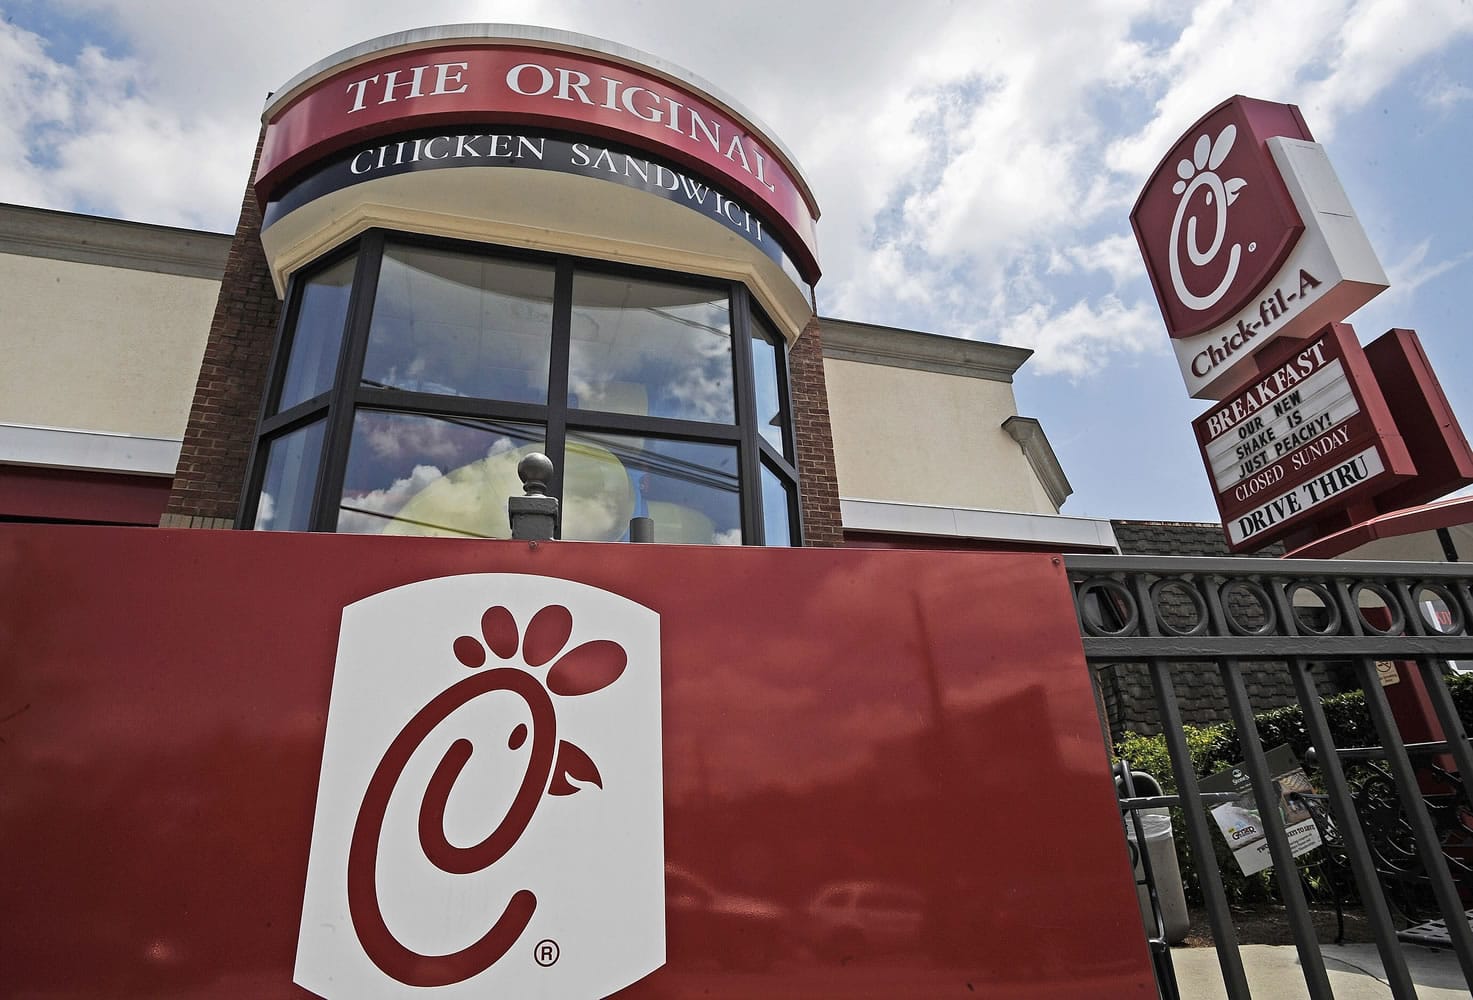 Chick-fil-A, which operates more than 1,850 restaurants in 41 states and Washington D.C., is looking to expand into Oregon and Washington.